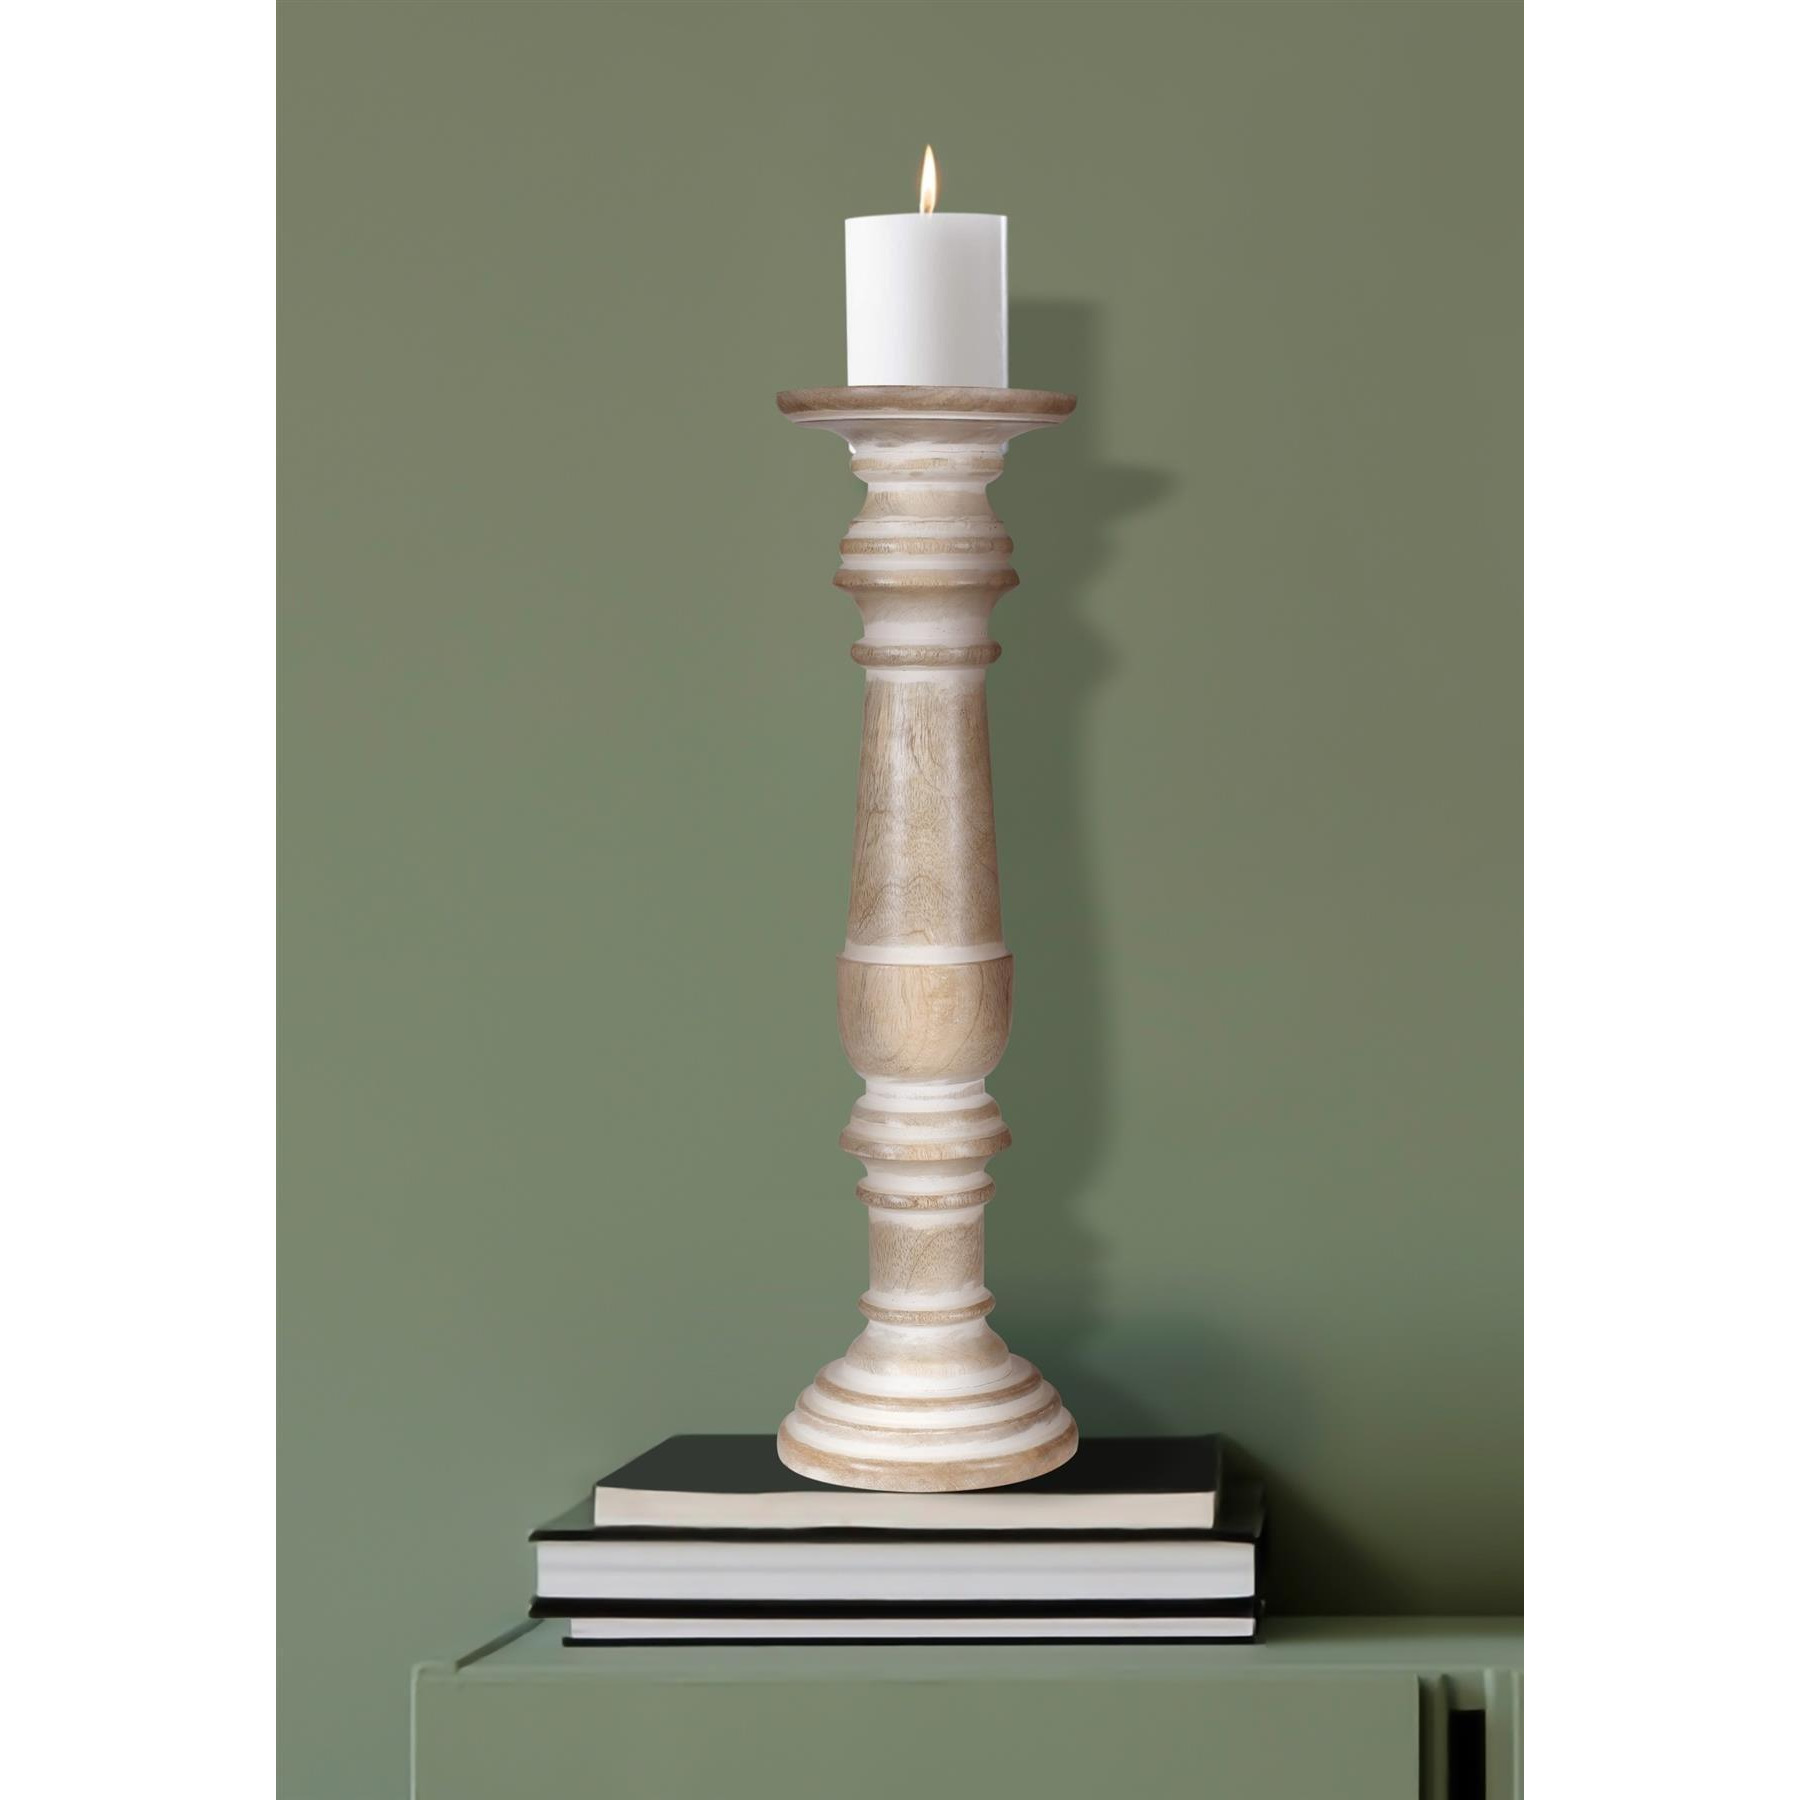 Rustic Antique Carved Wooden Pillar Church Candle Holder White Light, Large 31cm High - image 1